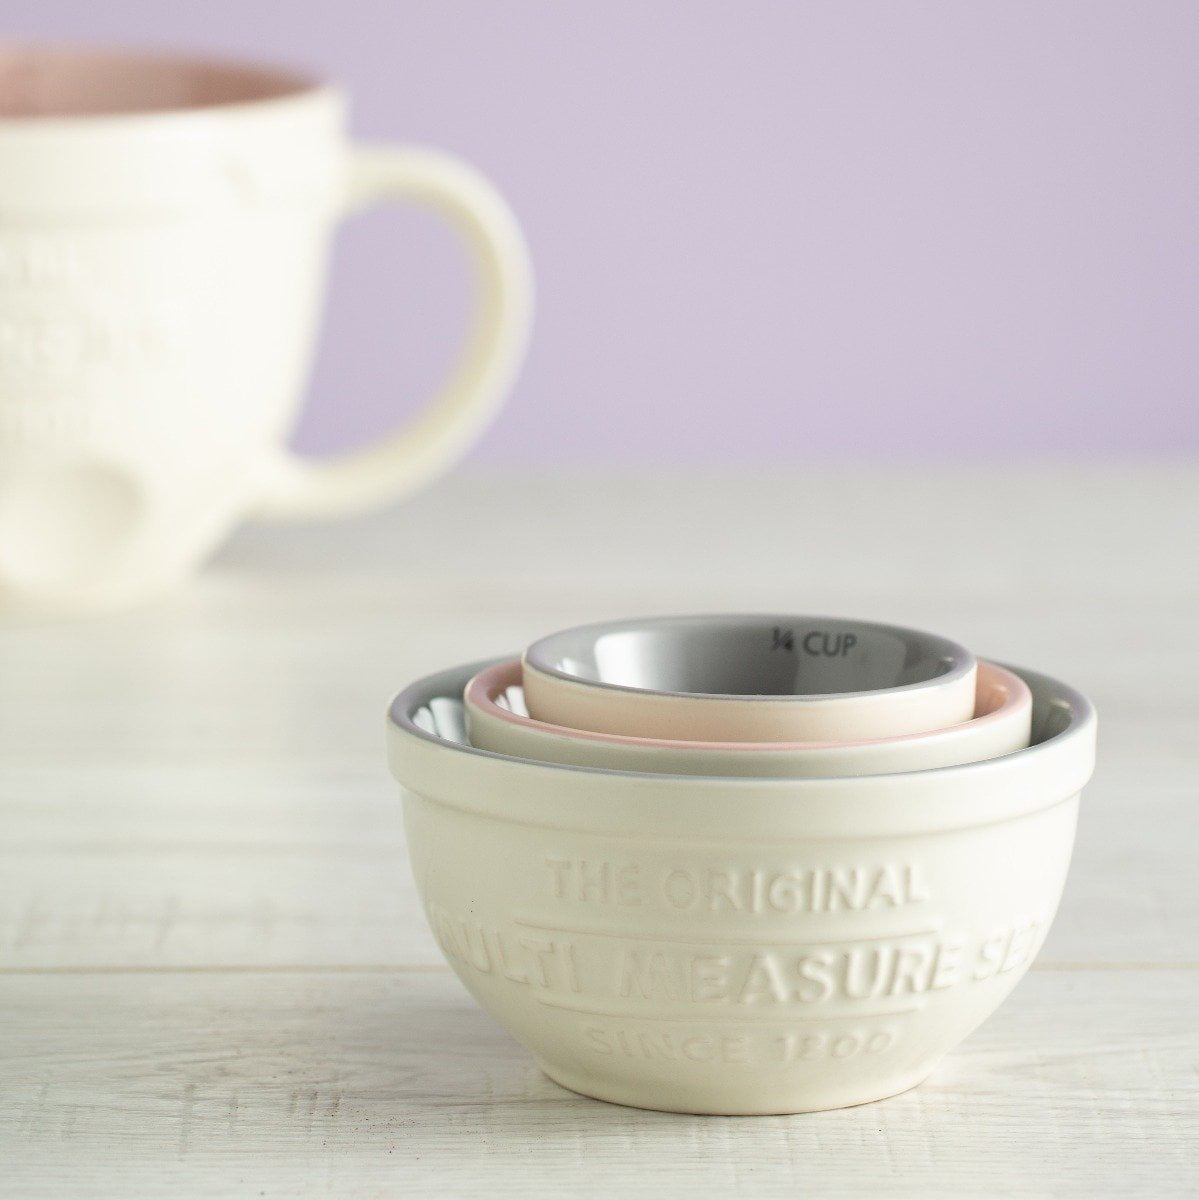 tiny measuring cups – Katahdin Furniture of New Haven